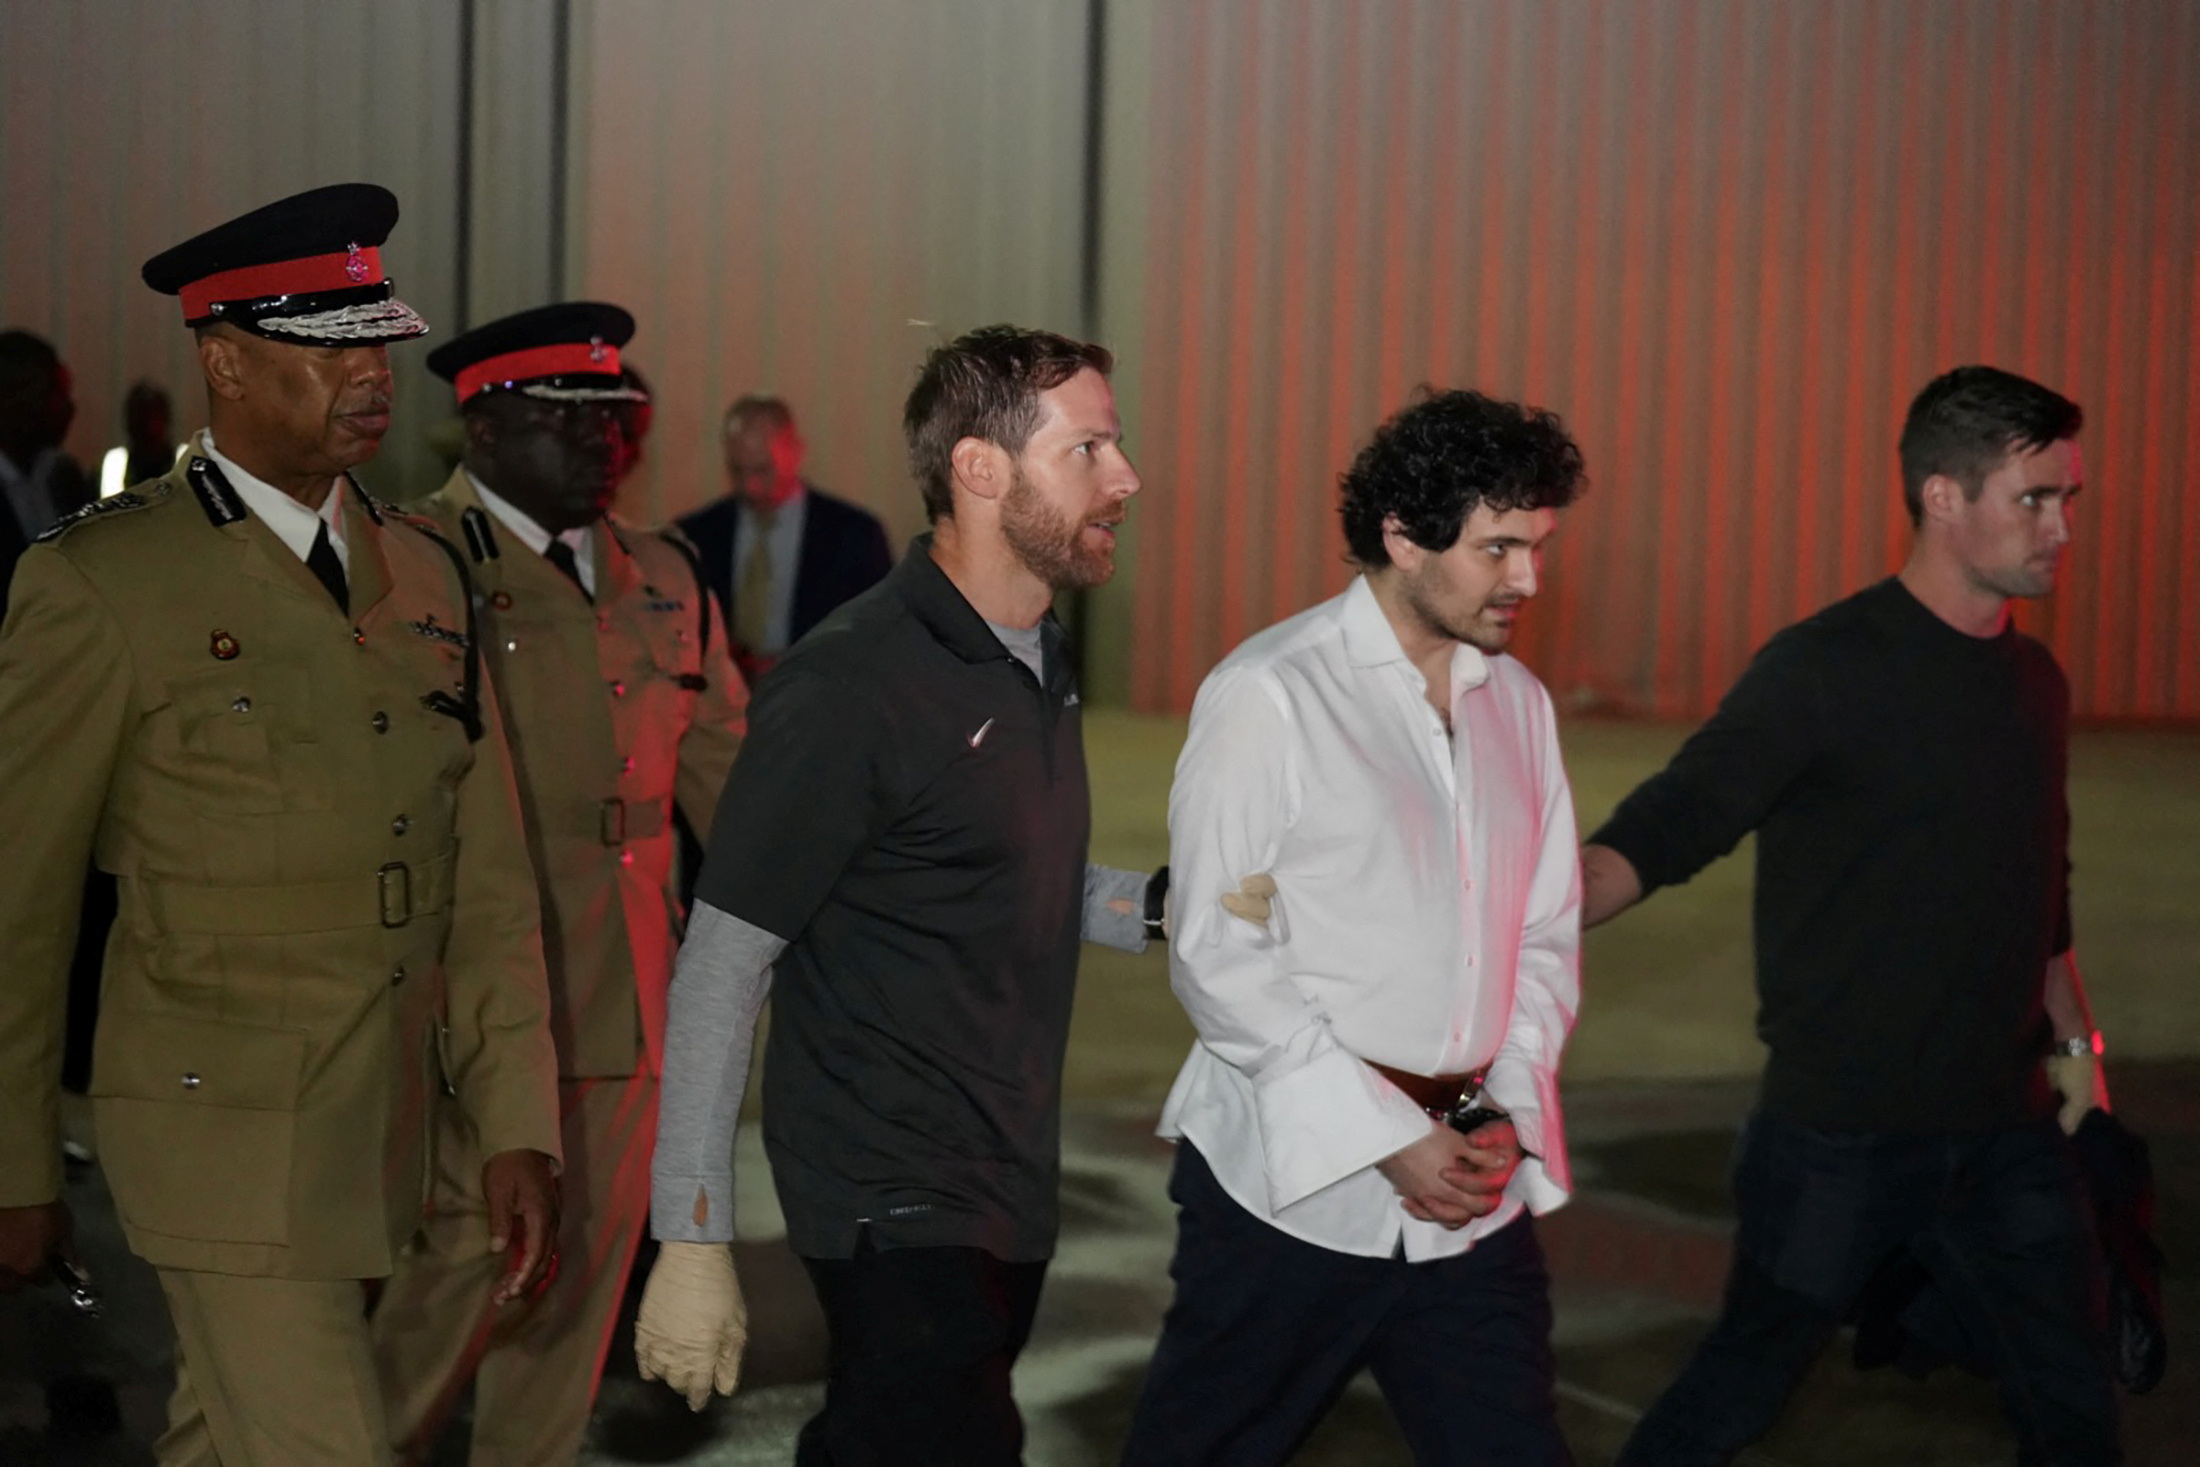 Sam Bankman-Fried, founder and former CEO of crypto currency exchange FTX, is walked in handcuffs to a plane during his extradition to the United States at Lynden Pindling international airport in Nassau, Bahamas December 21, 2022.  Royal Bahamas Police Force/Handout via REUTERS